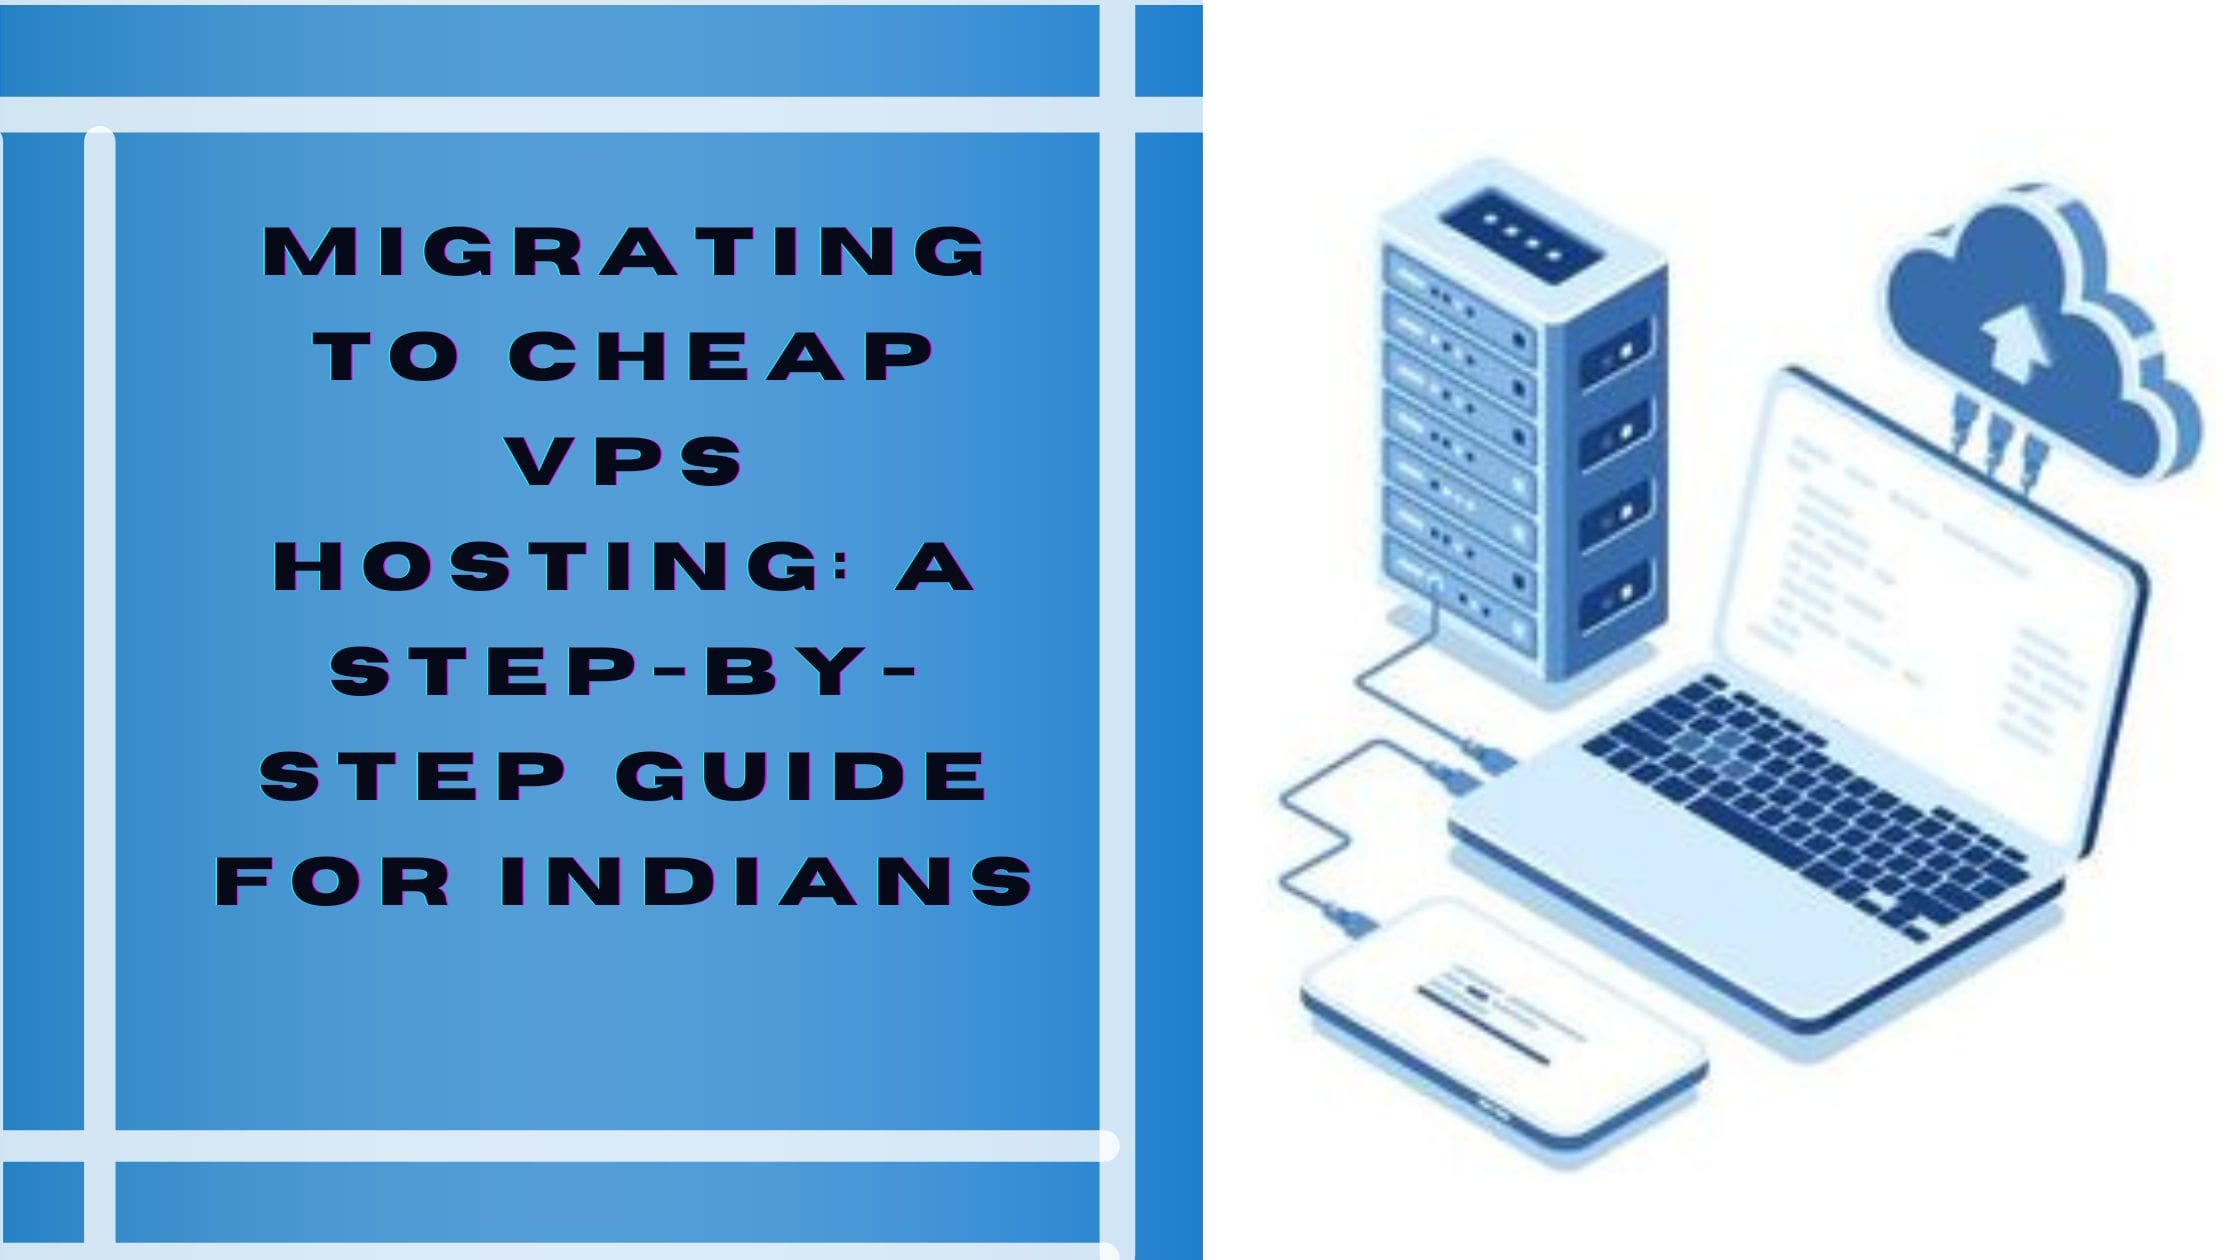 Migrating to Cheap VPS Hosting: A Step-by-Step Guide for Indians